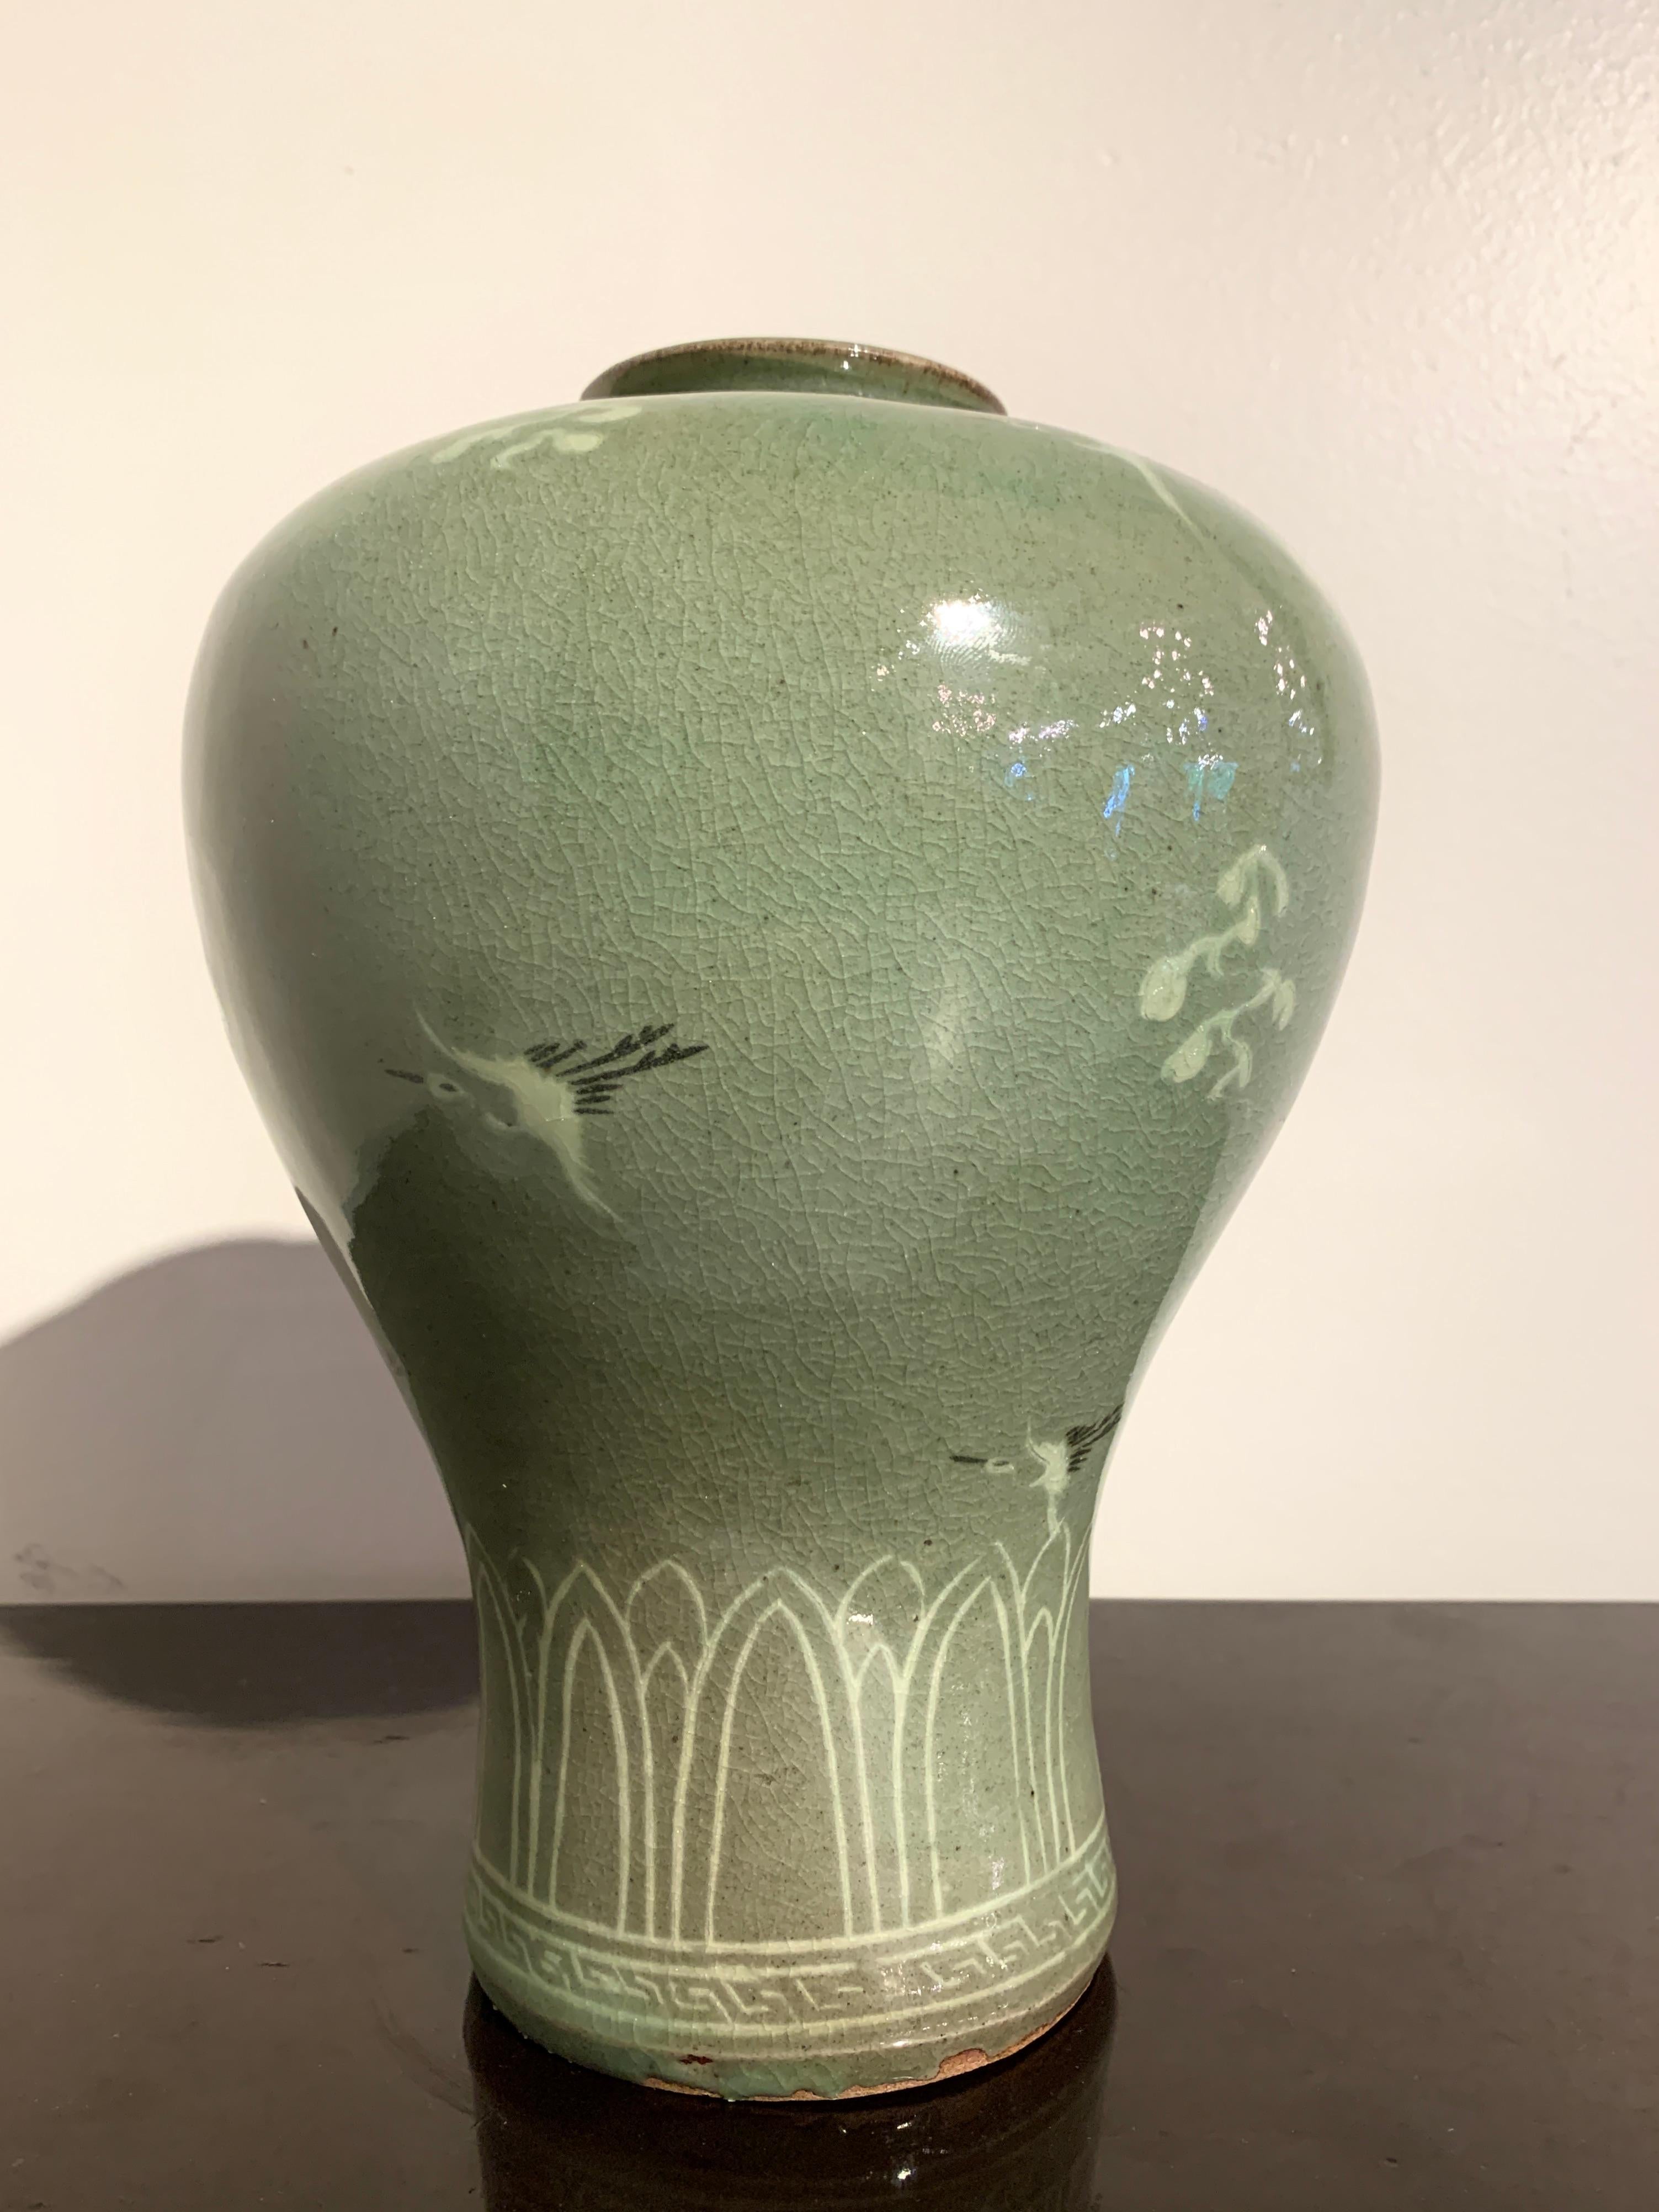 A fine and attractive Korean celadon glazed maebyeong vase with slip inlaid decoration, mid 20th century, Korea.

The elegant vase of somewhat exaggerated maebyeong shape, with a narrow waist, high, bulging shoulders, short neck with wide mouth,